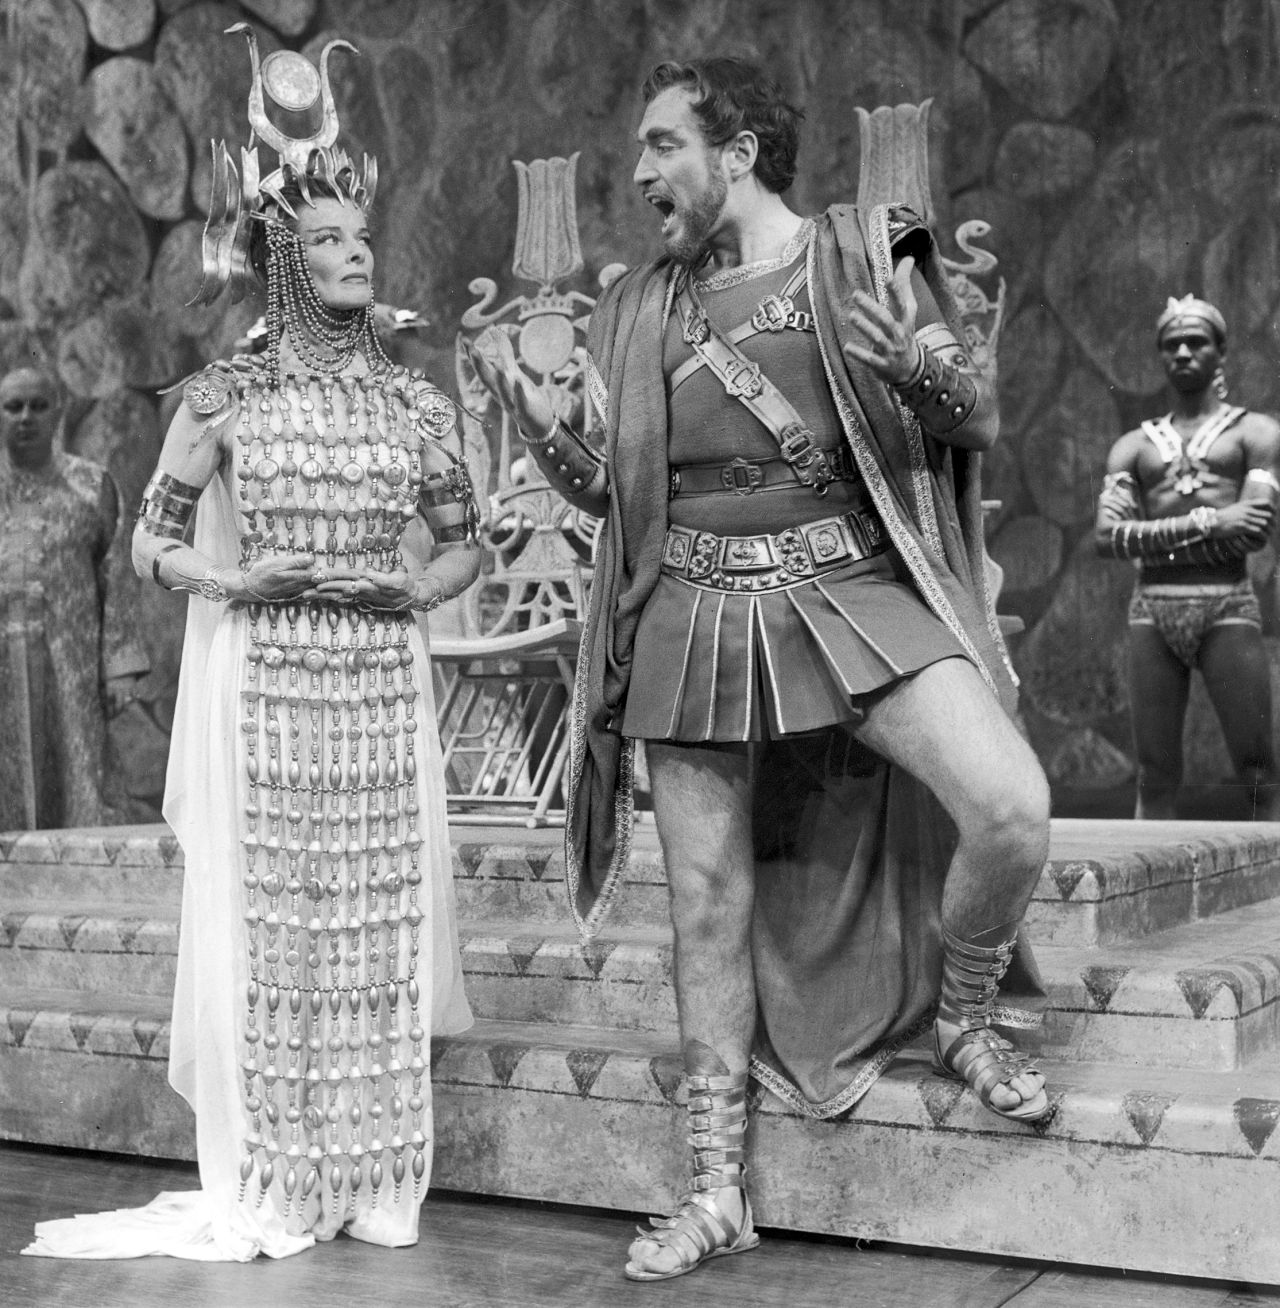 Robert Ryan and Katharine Hepburn embracing in a scene from "Antony and Cleopatra" at the American Shakespeare Festival in 1960.